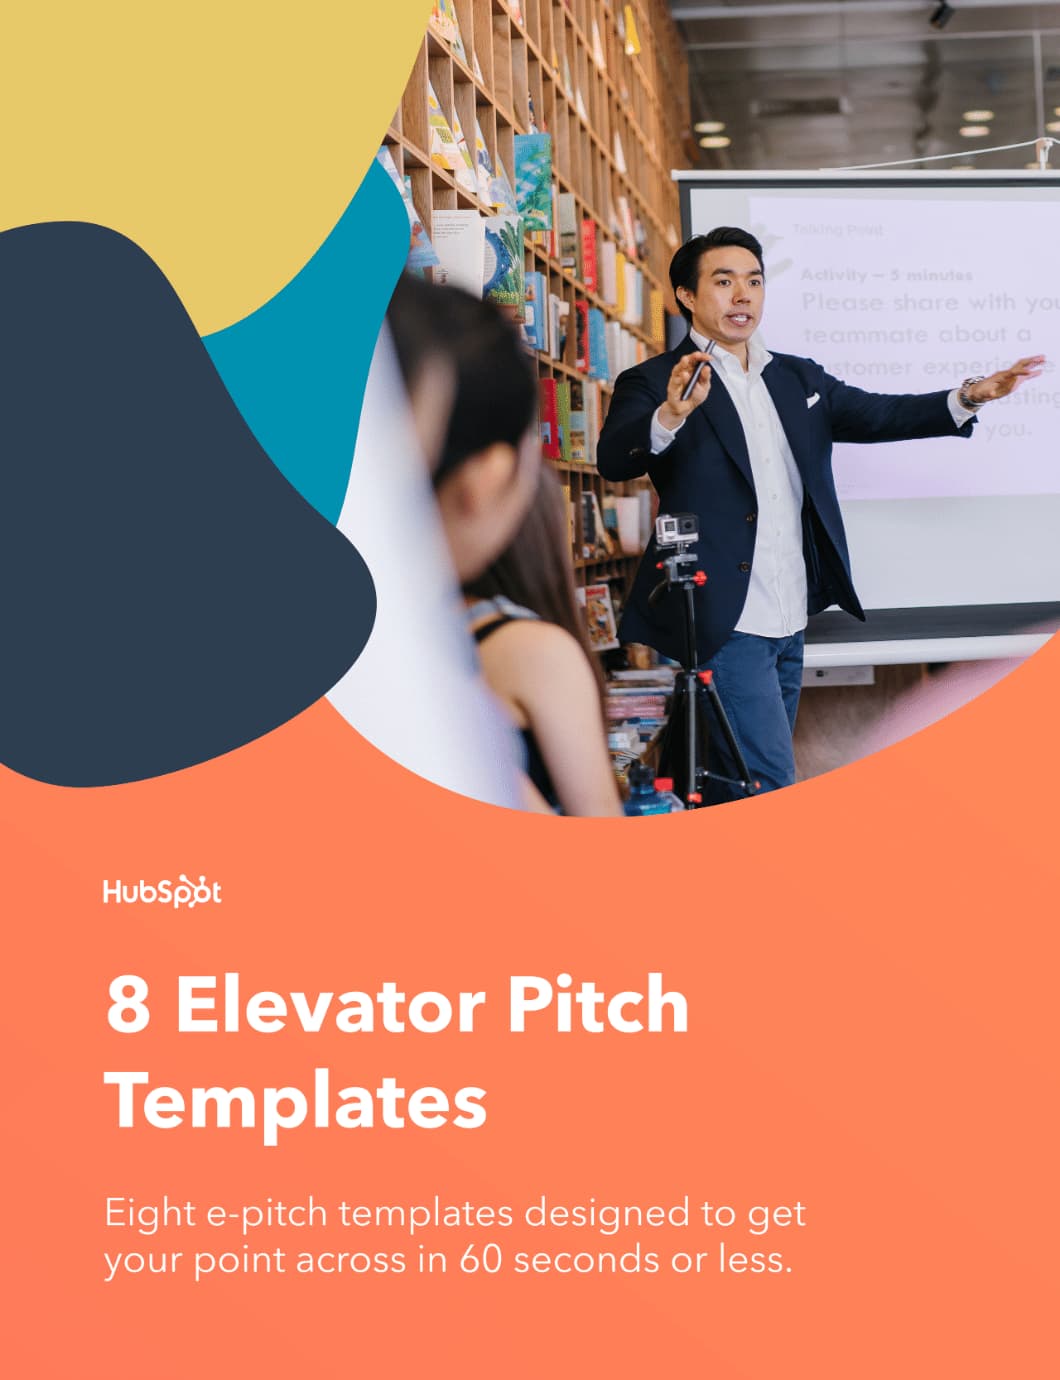 8 elevator pitch templates to help you develop and deliver great elevator pitches